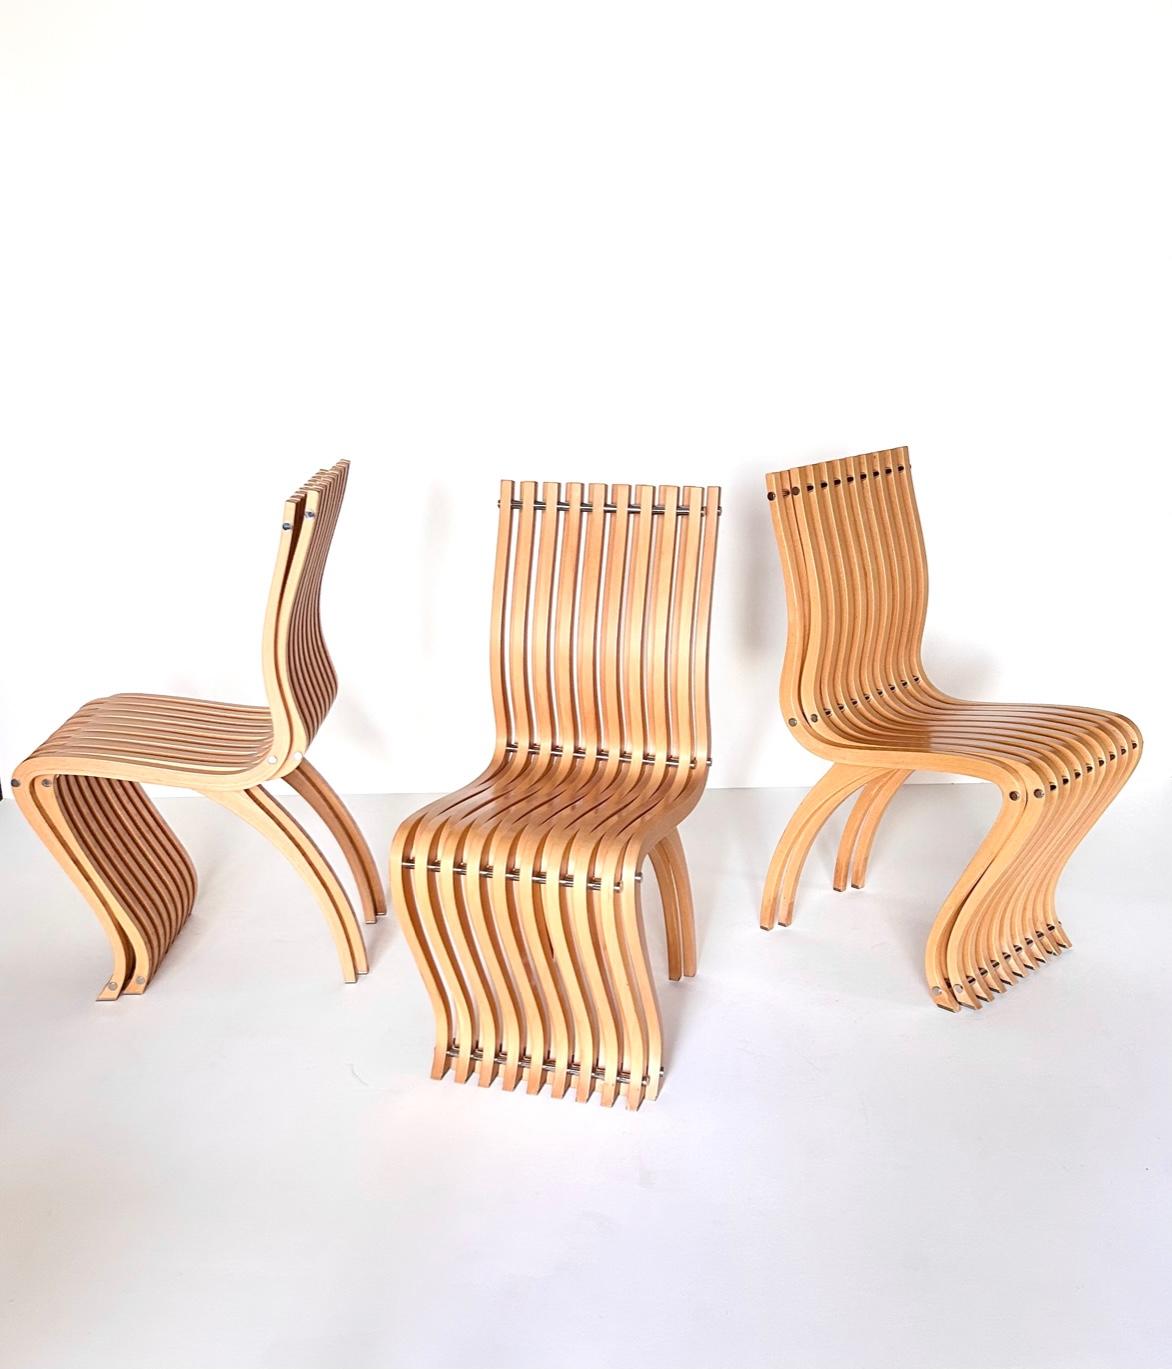 Late 20th Century Set of 6 Schizzo chairs by Ron Arad, Vitra, 1989